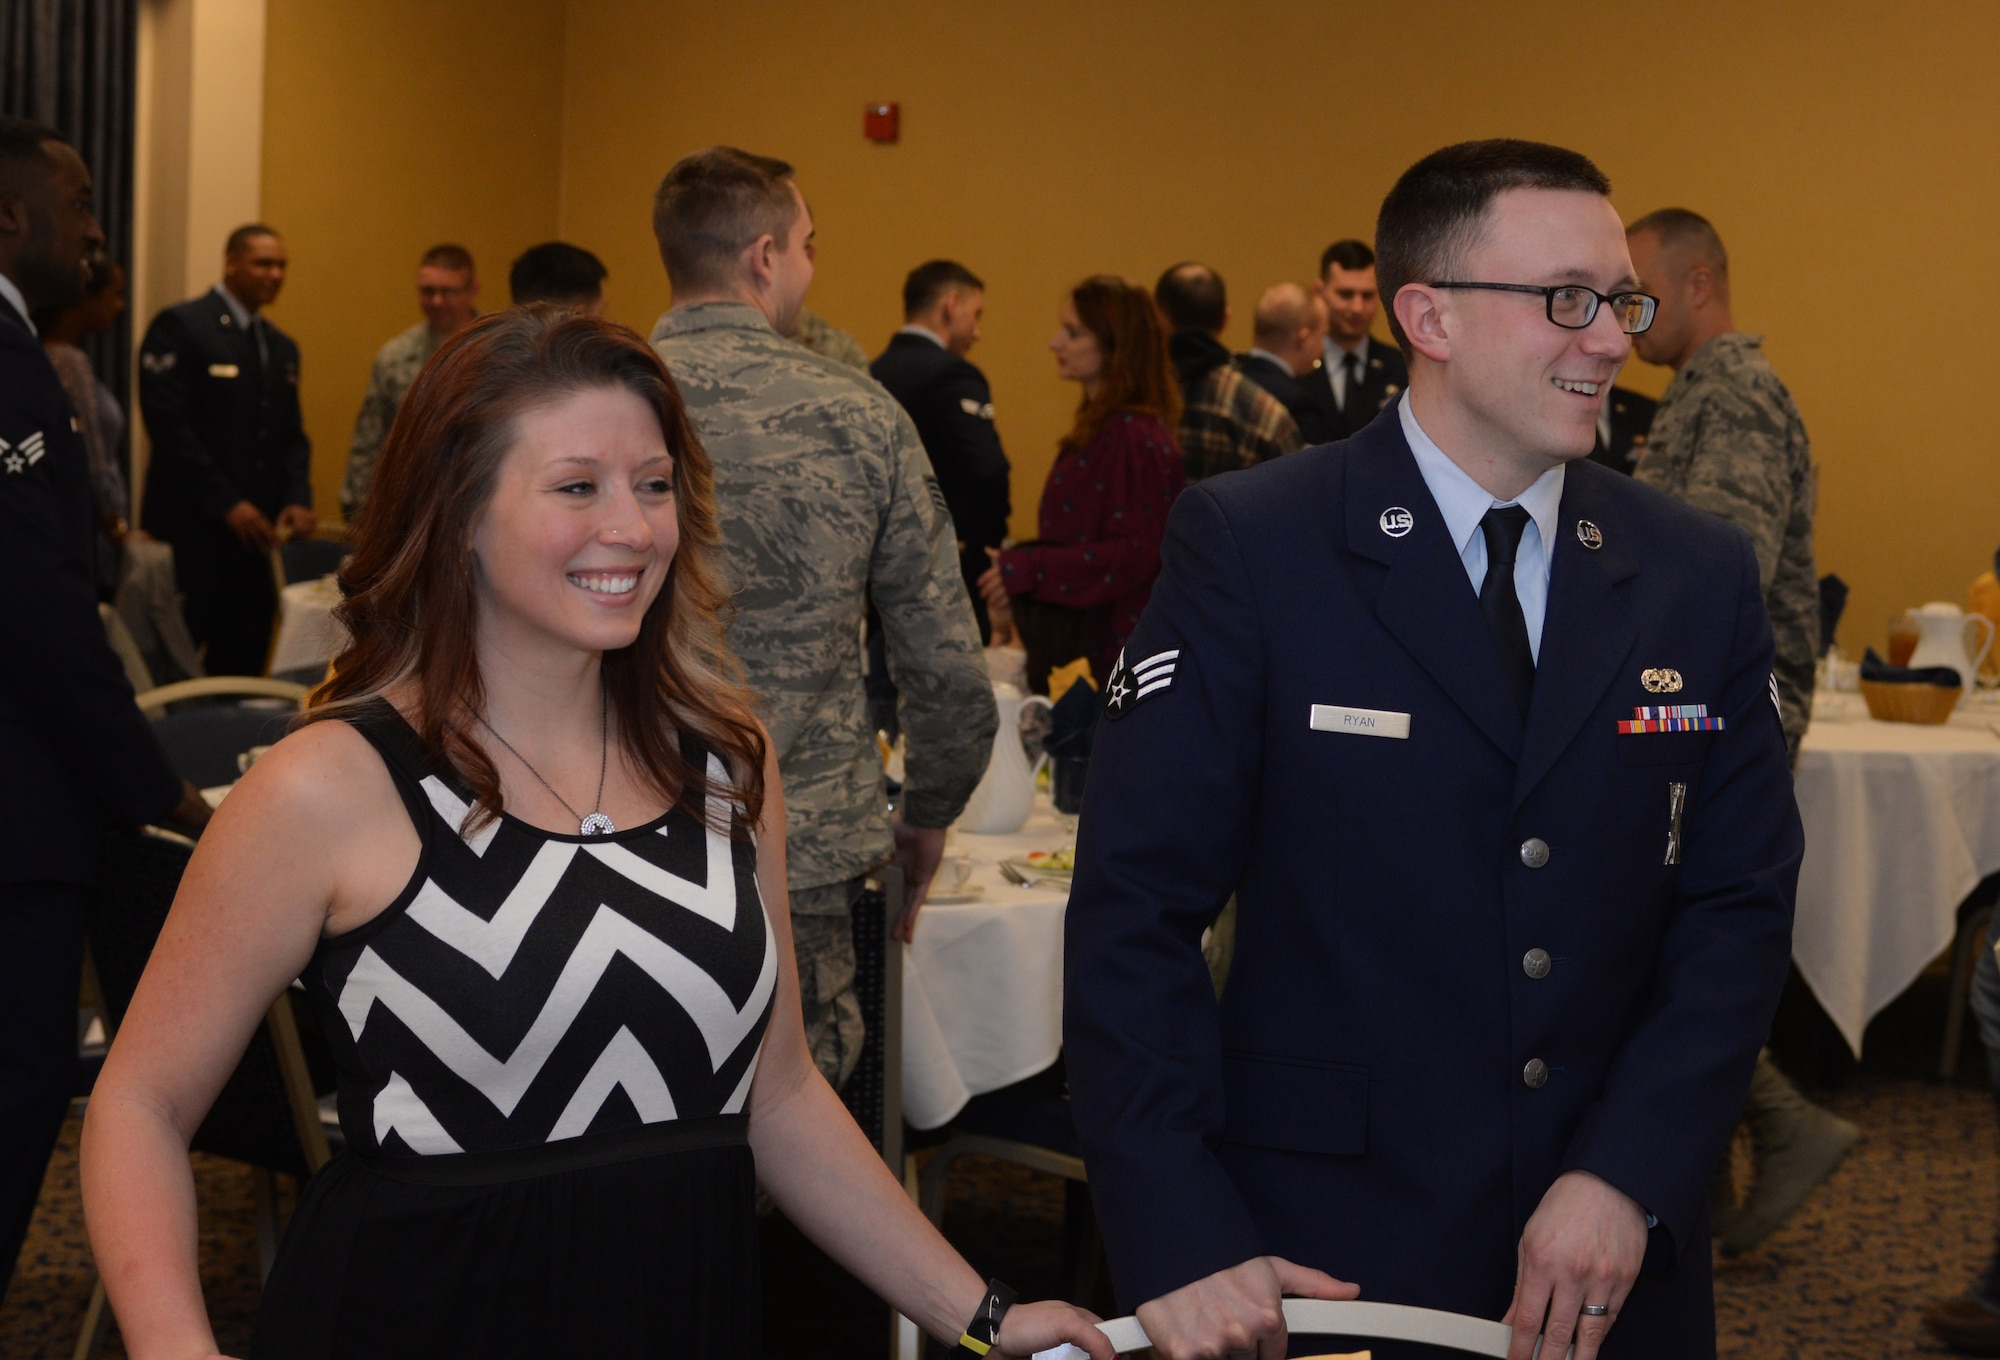 Heather Ryan, left, and her spouse Senior Airman Michael Ryan, a 28th Munitions Squadron armament systems crew member, mingle with other attendees during an Airman Leadership School graduation in the Dakota’s Club at Ellsworth Air Force Base, S.D., Feb. 2, 2018. Prior to the graduation, spouses and their Airmen had the opportunity to attend the first spouse’s orientation program, which provided attendees the chance to ask questions and receive clarification on issues such as appropriate attire and etiquette. (U.S. Air Force photo by Airman 1st Class Thomas I. Karol)